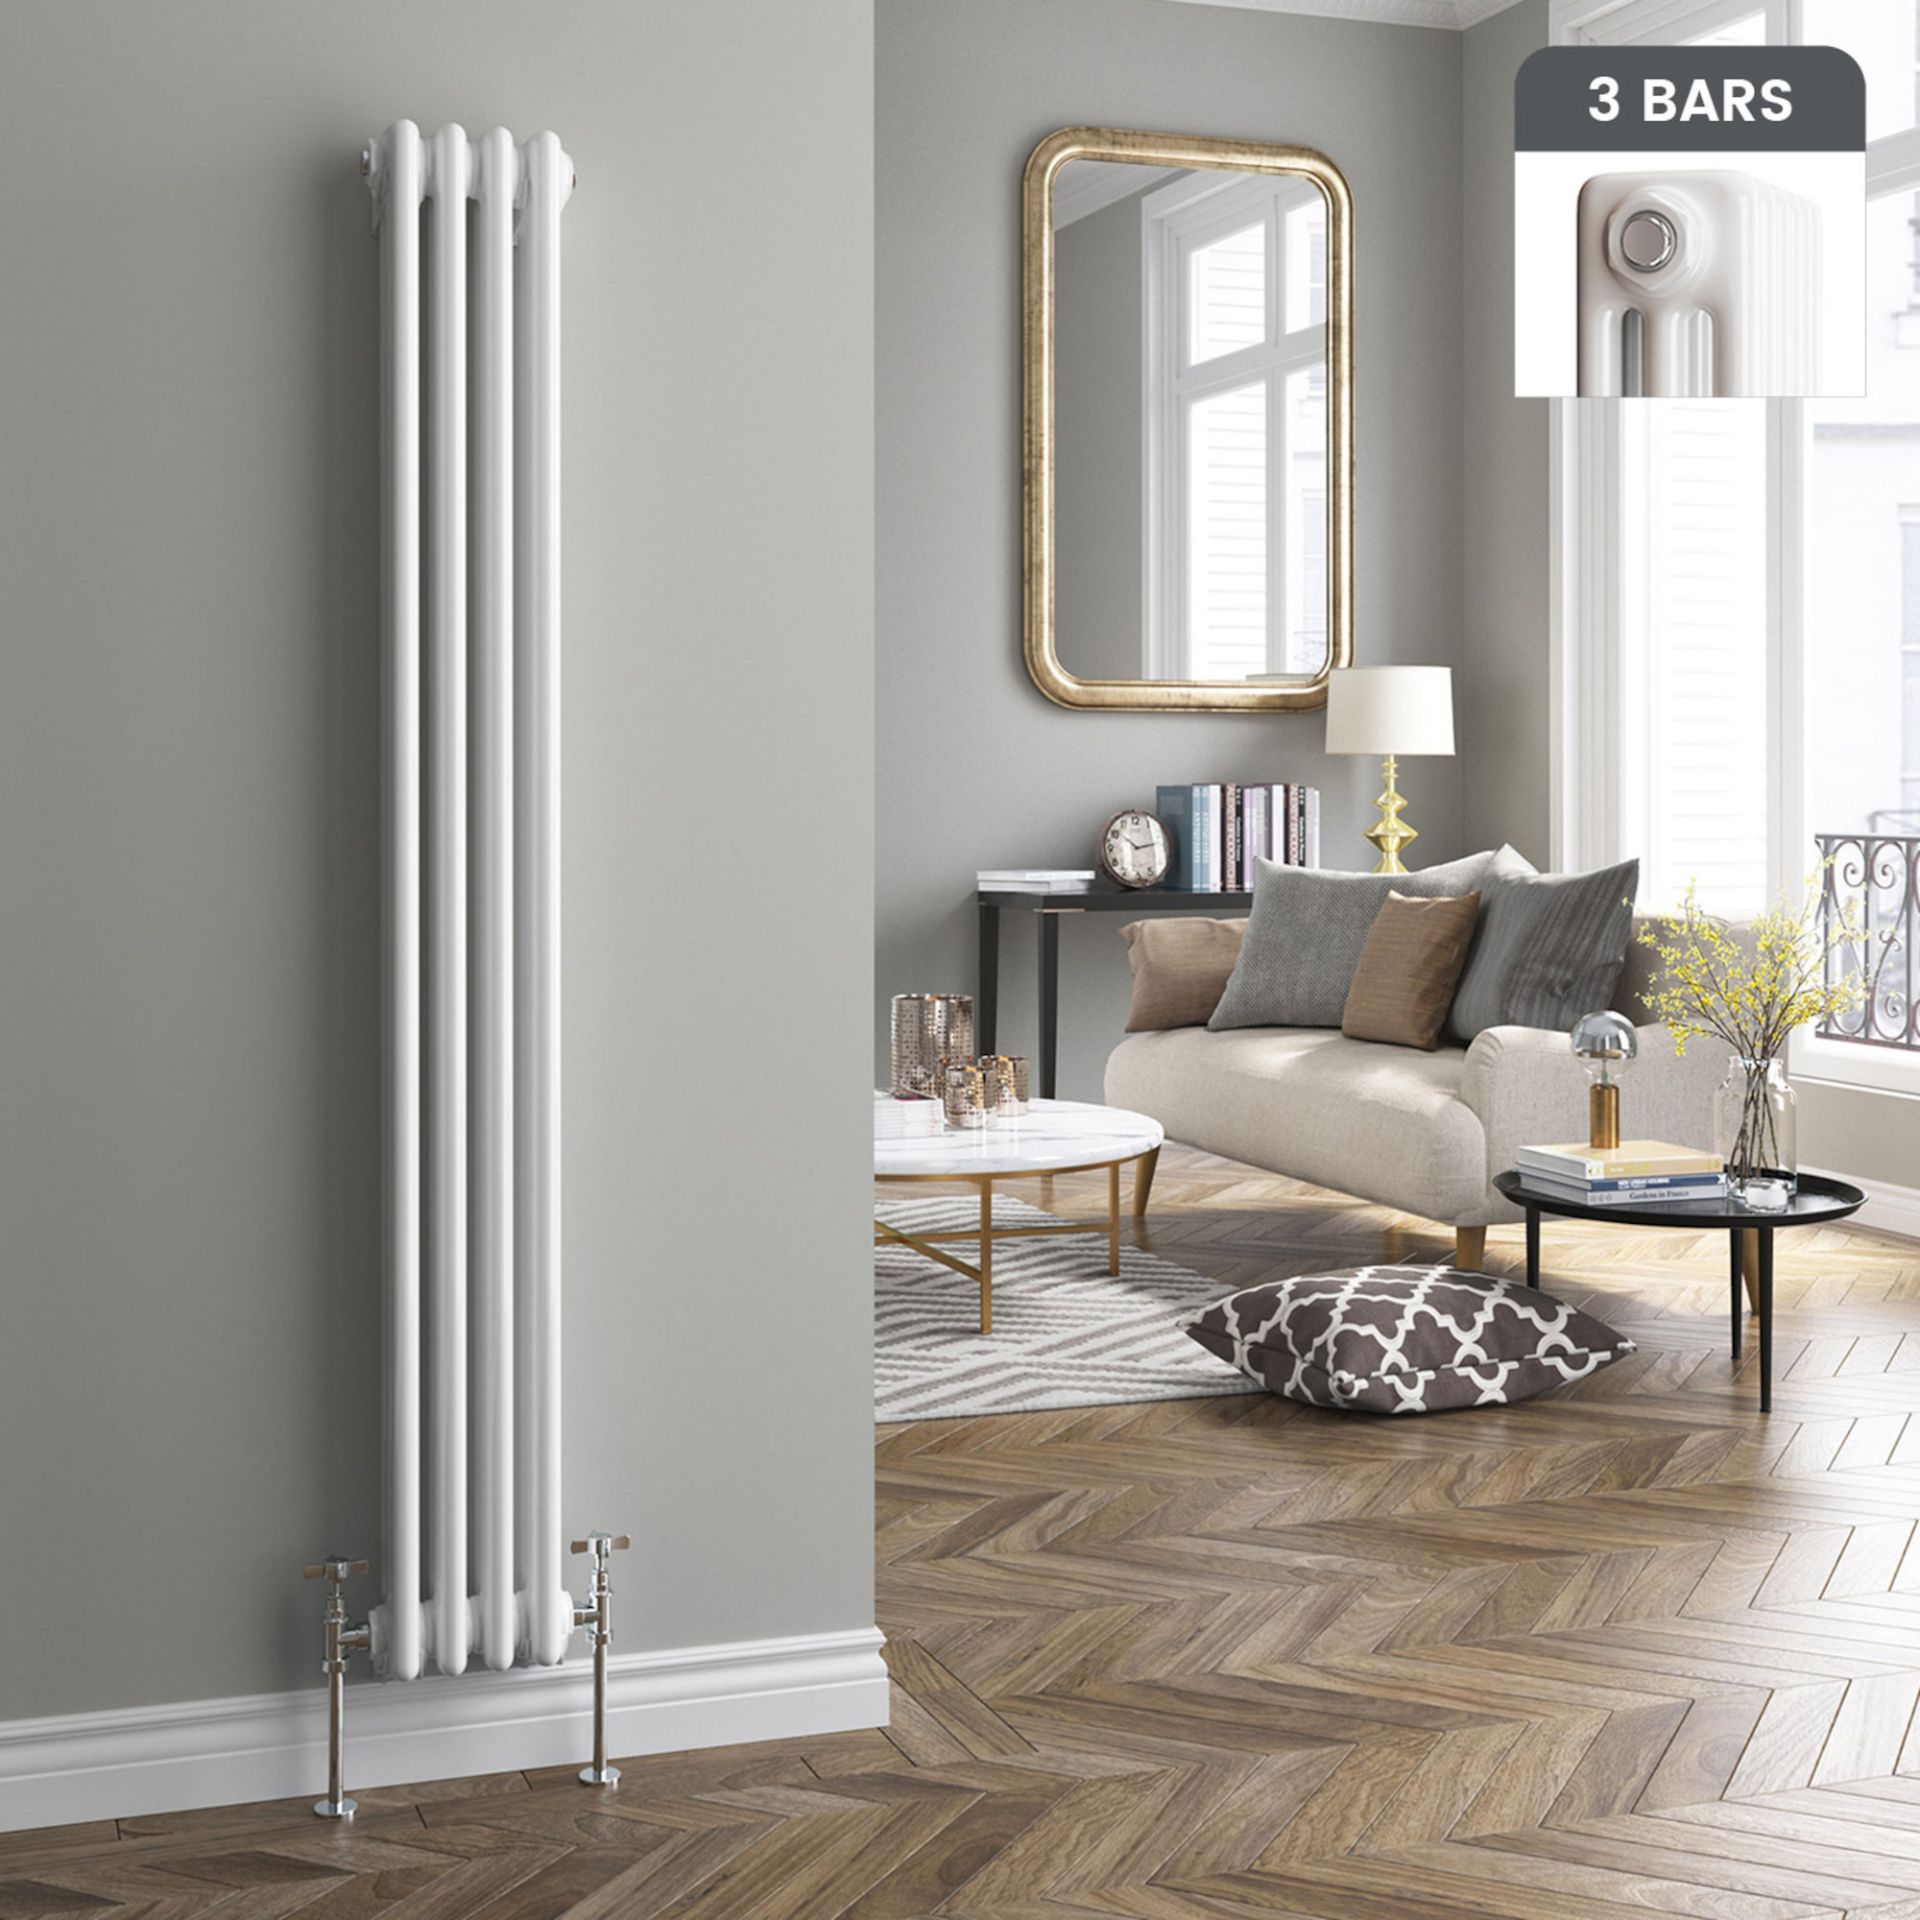 (NY170) 1500x200mm White Triple Panel Vertical Colosseum Traditional Radiator. RRP £331.99. Made